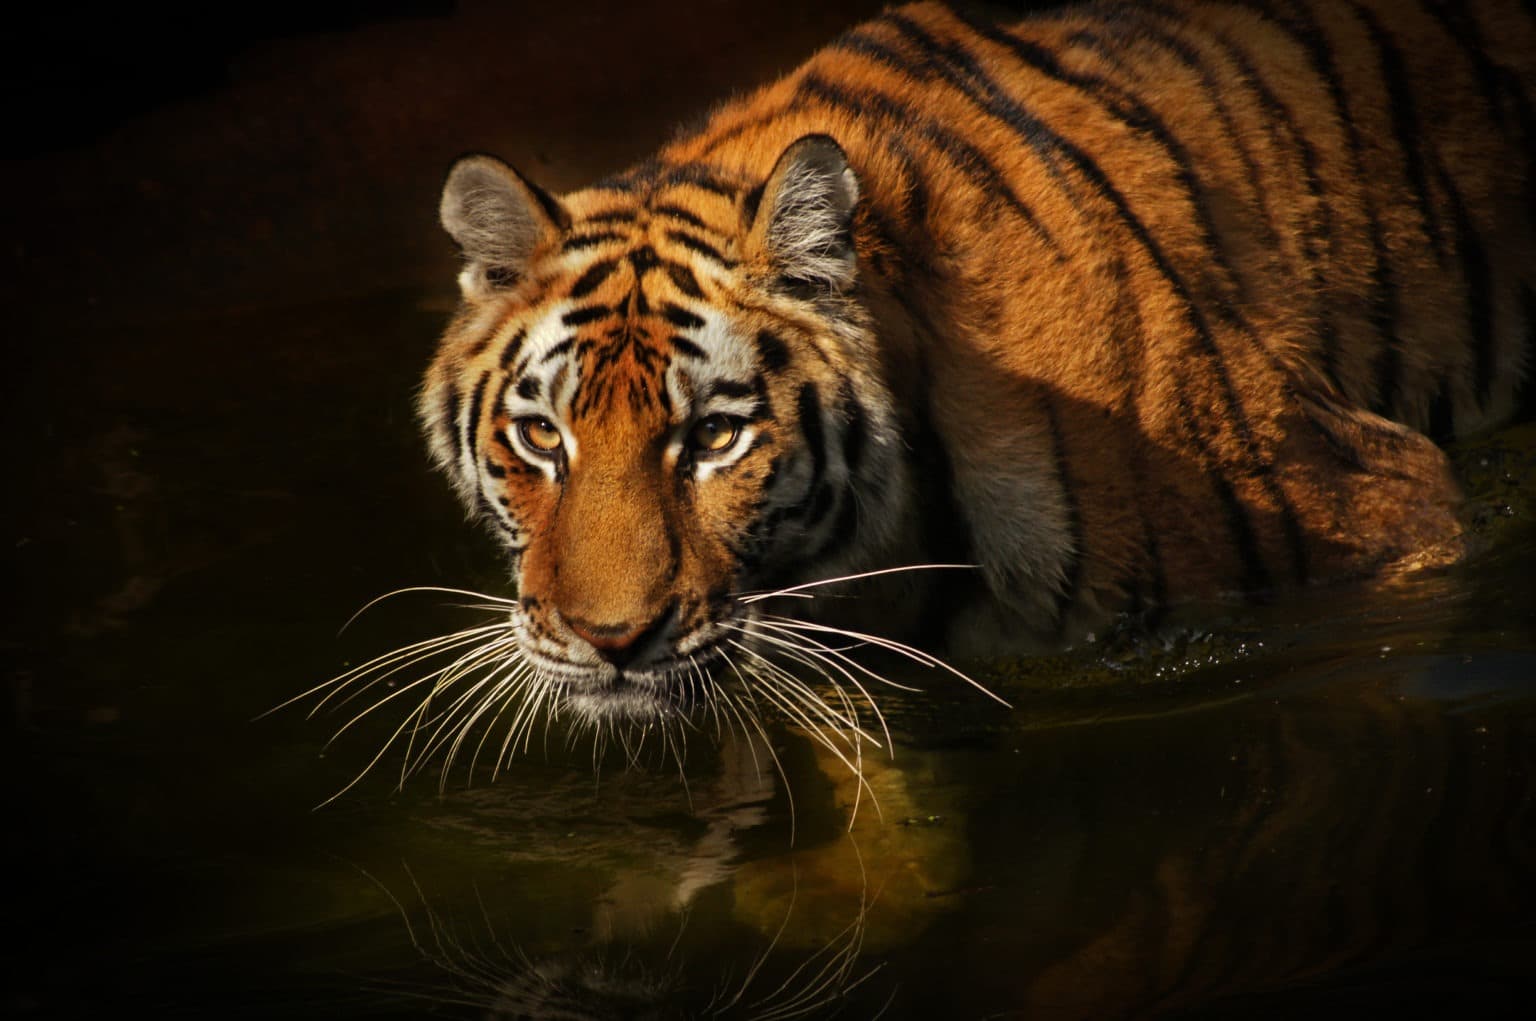 Human vs. Tiger: Can a Human Survive? (Everything to Know)